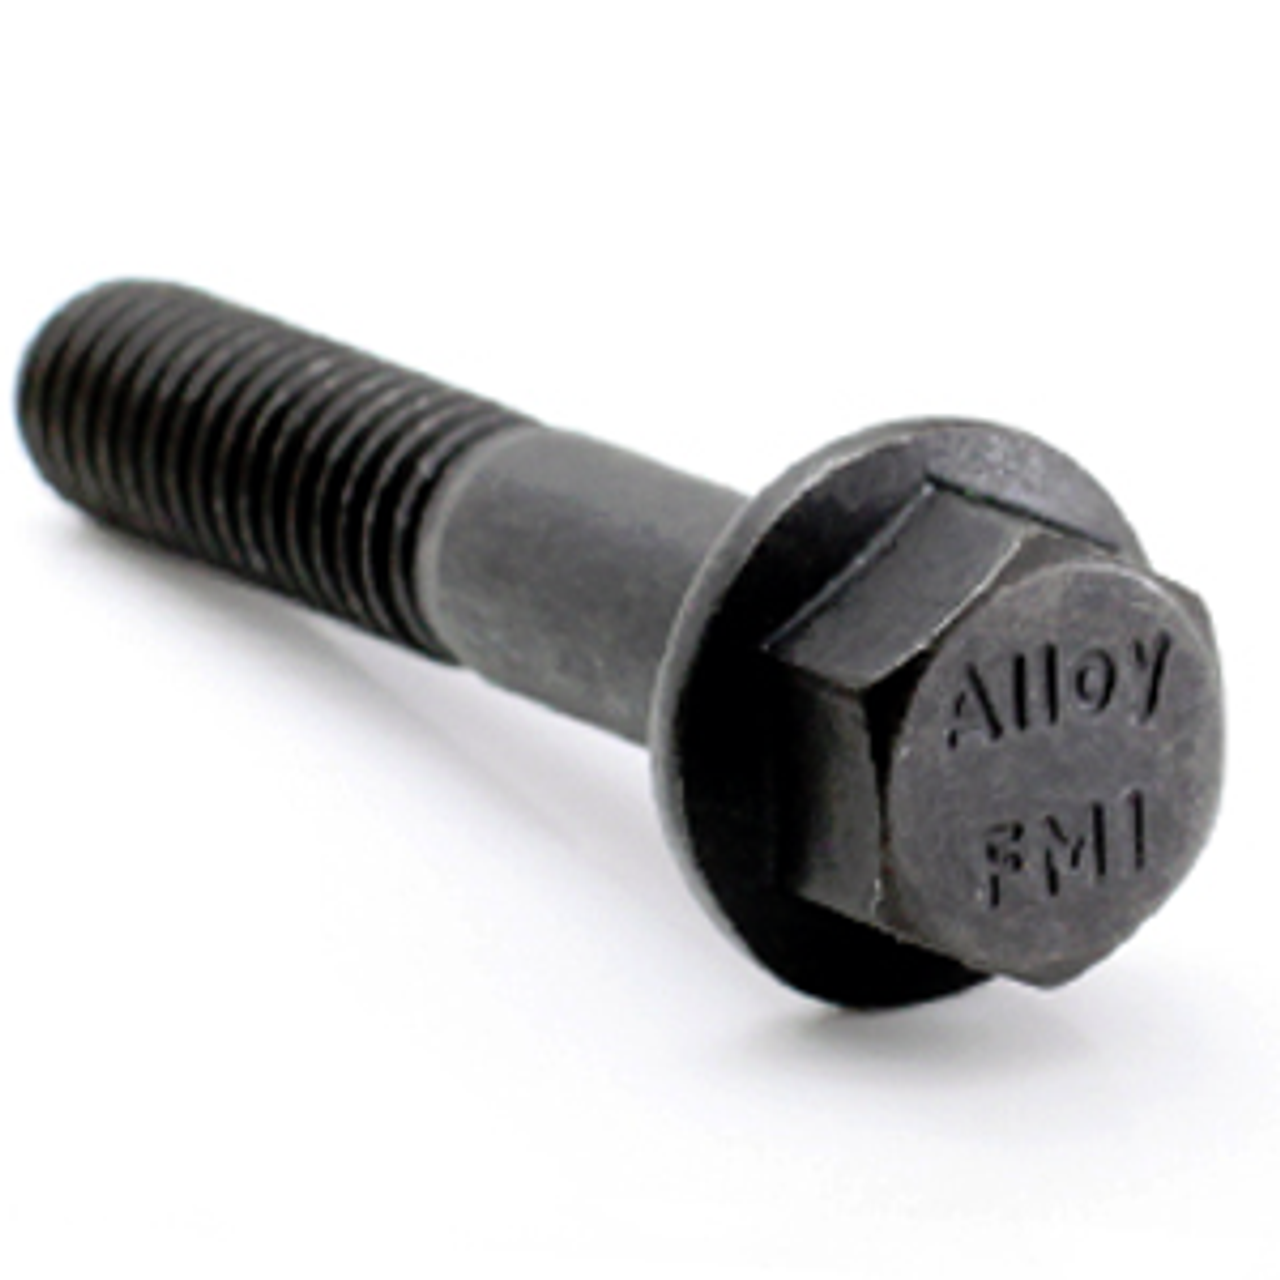 5/8"-11 x 2-1/4" Grade Frame Bolts AFT Fasteners